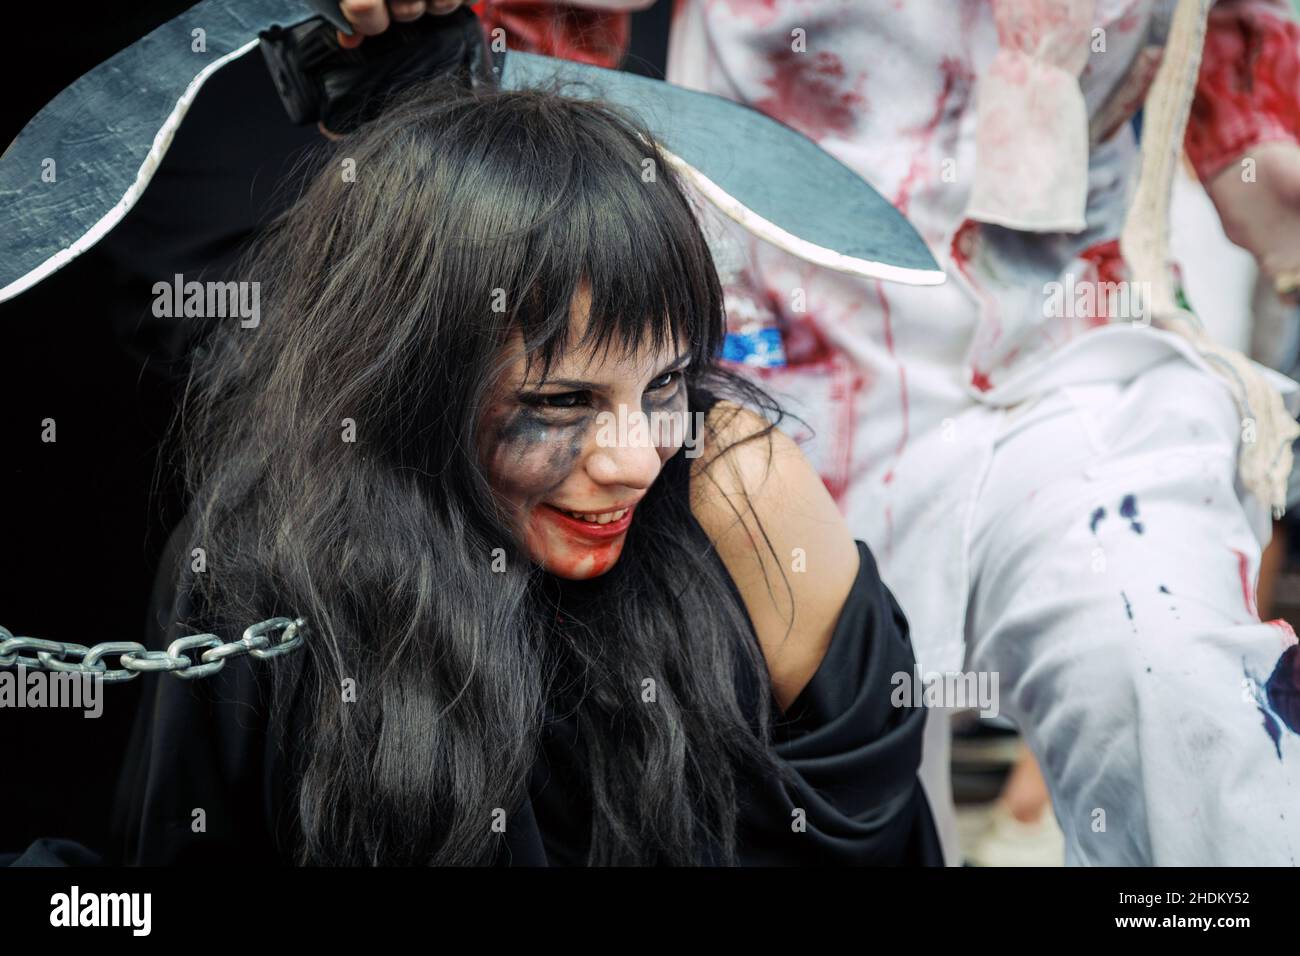 Sao Paulo, Brazil. 2nd November, 2013. A person dressed up as a zombie attends the annual Zombie Walk in Sao Paulo, Brazil. Stock Photo